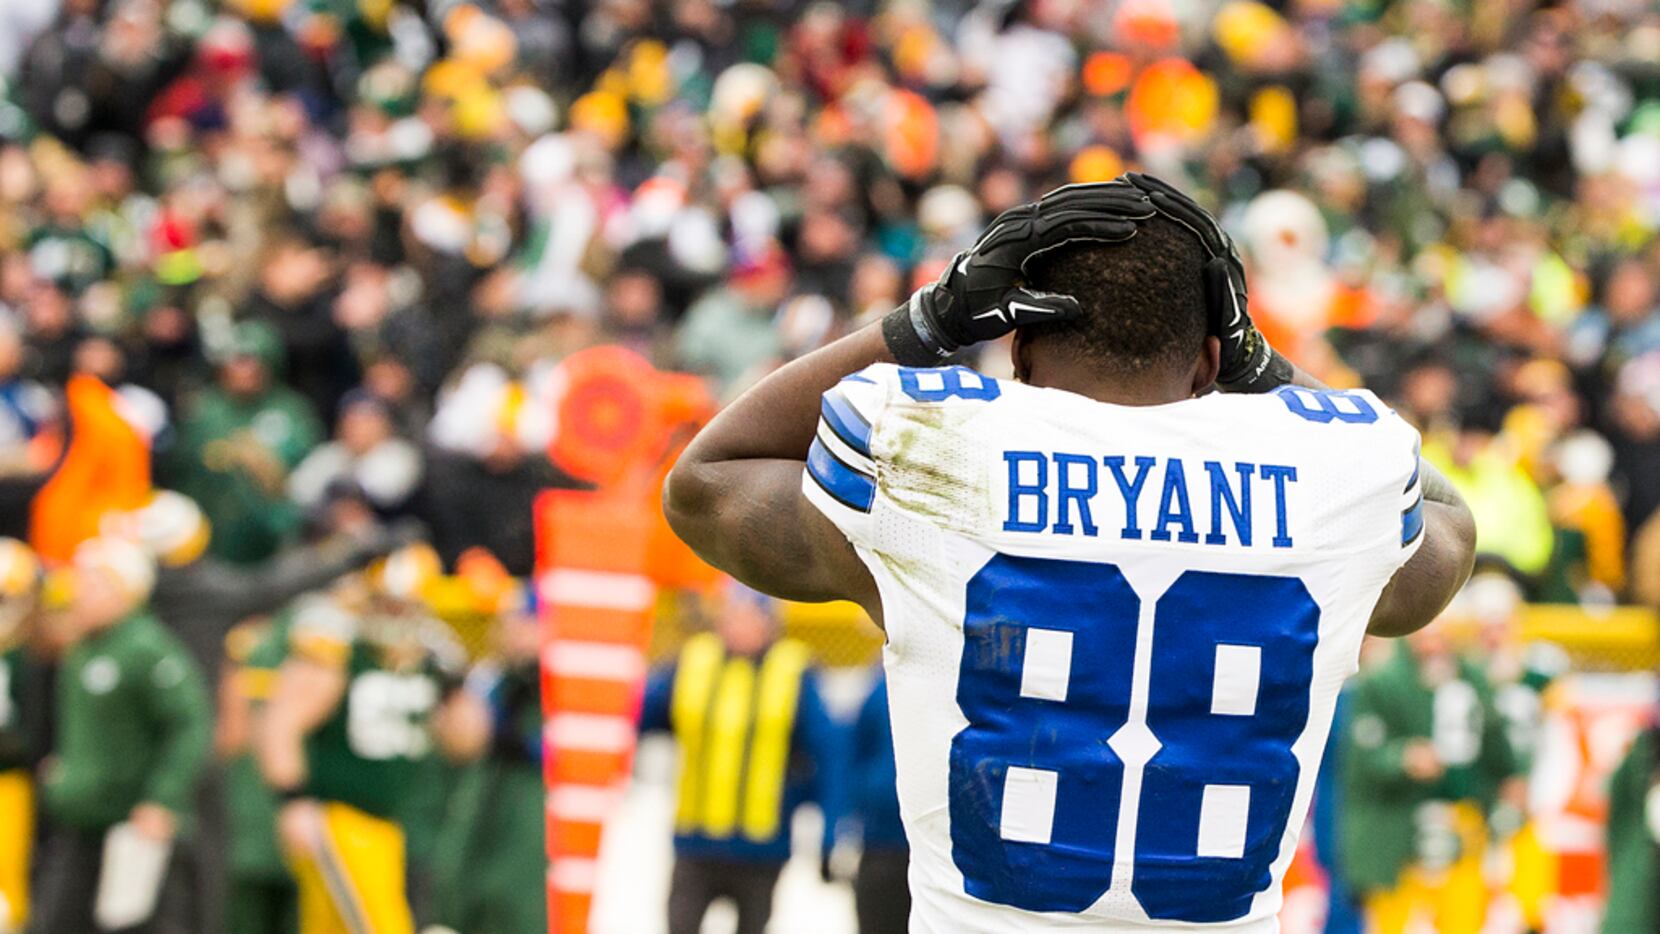 George: Dez Bryant disappears on the field and from the locker room